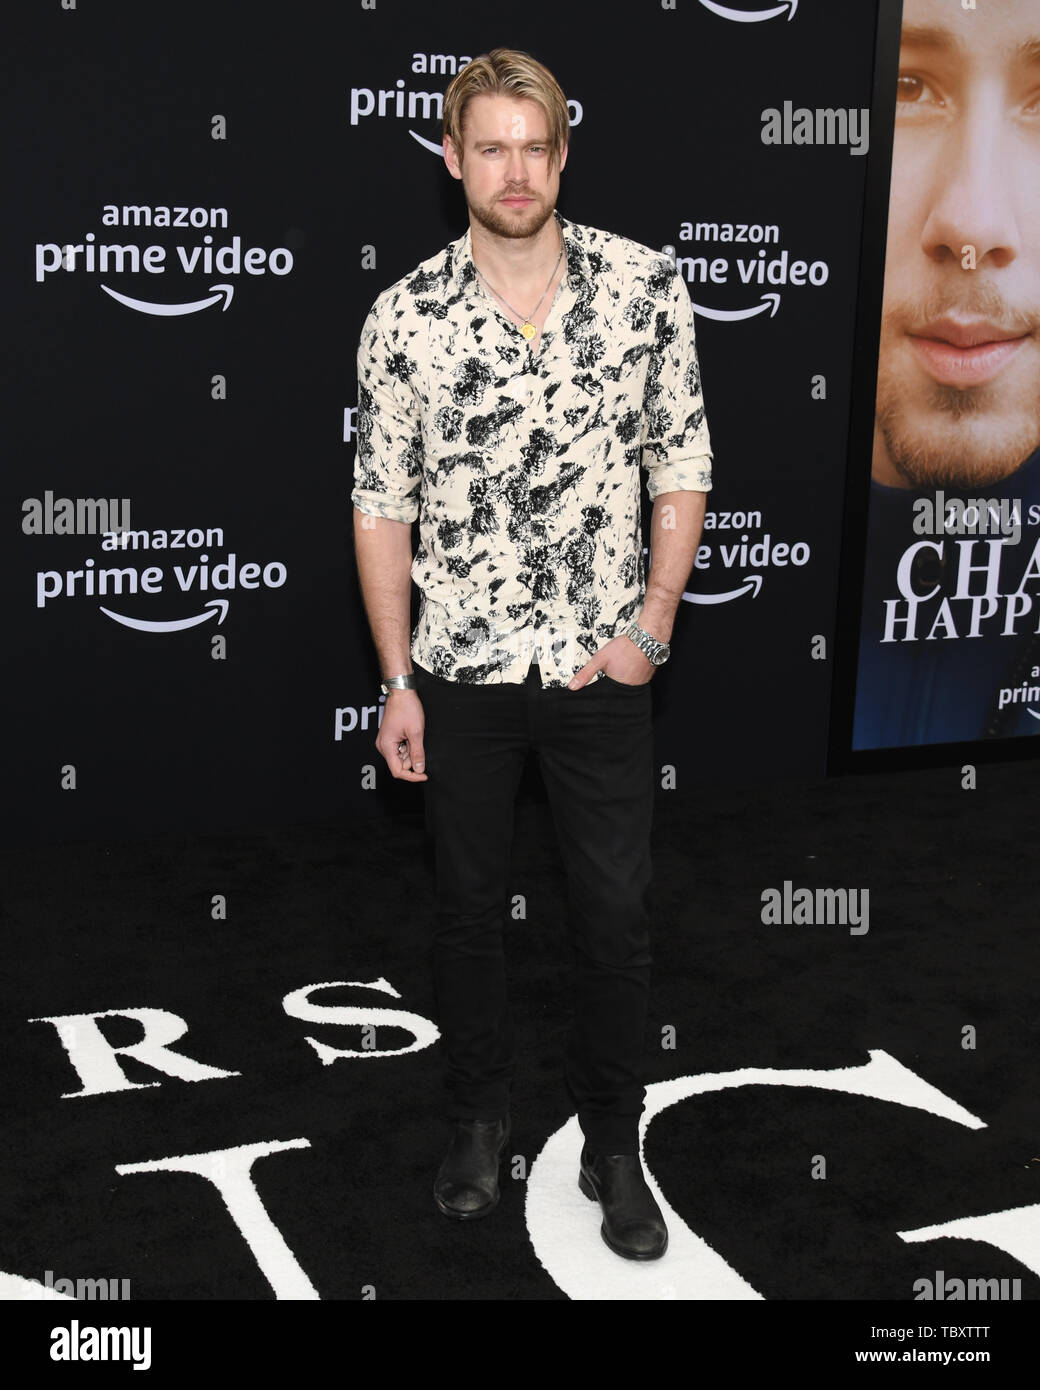 June 3, 2019 - Westwood, California, USA - 02, June 2019 - Westwood Village, California. Chord Overstreet attends Premiere Of Amazon Prime Video's 'Chasing Happiness' at the Regency Village Bruin Theatre. (Credit Image: © Billy Bennight/ZUMA Wire) Stock Photo